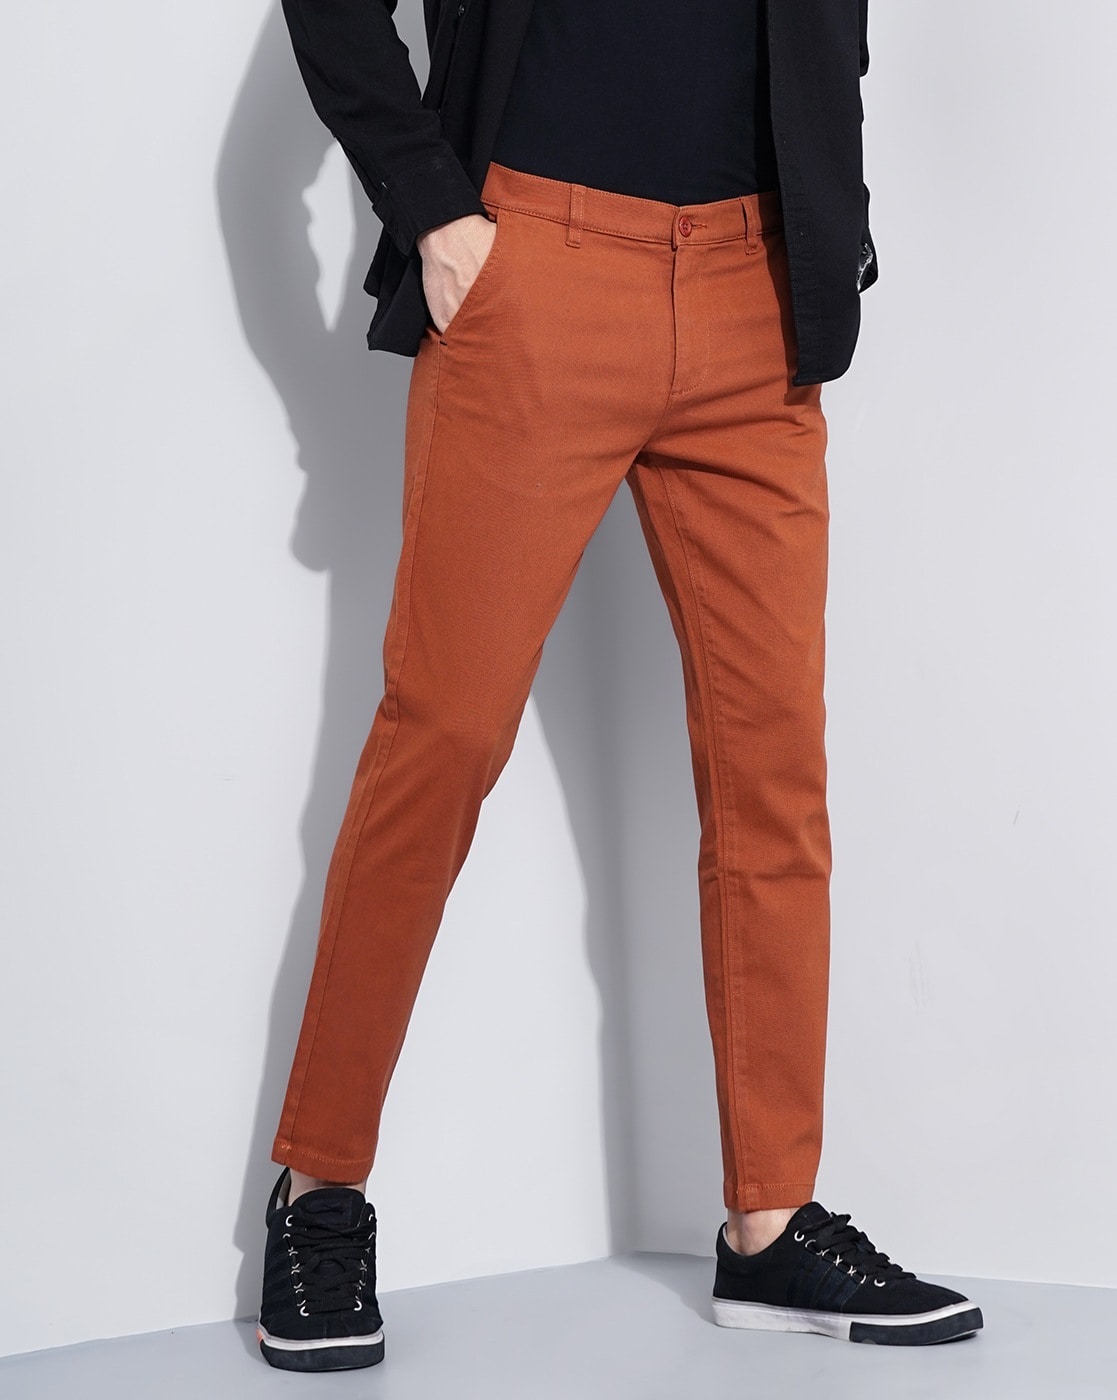 Buy Brick Red Men Pant Cotton for Best Price, Reviews, Free Shipping